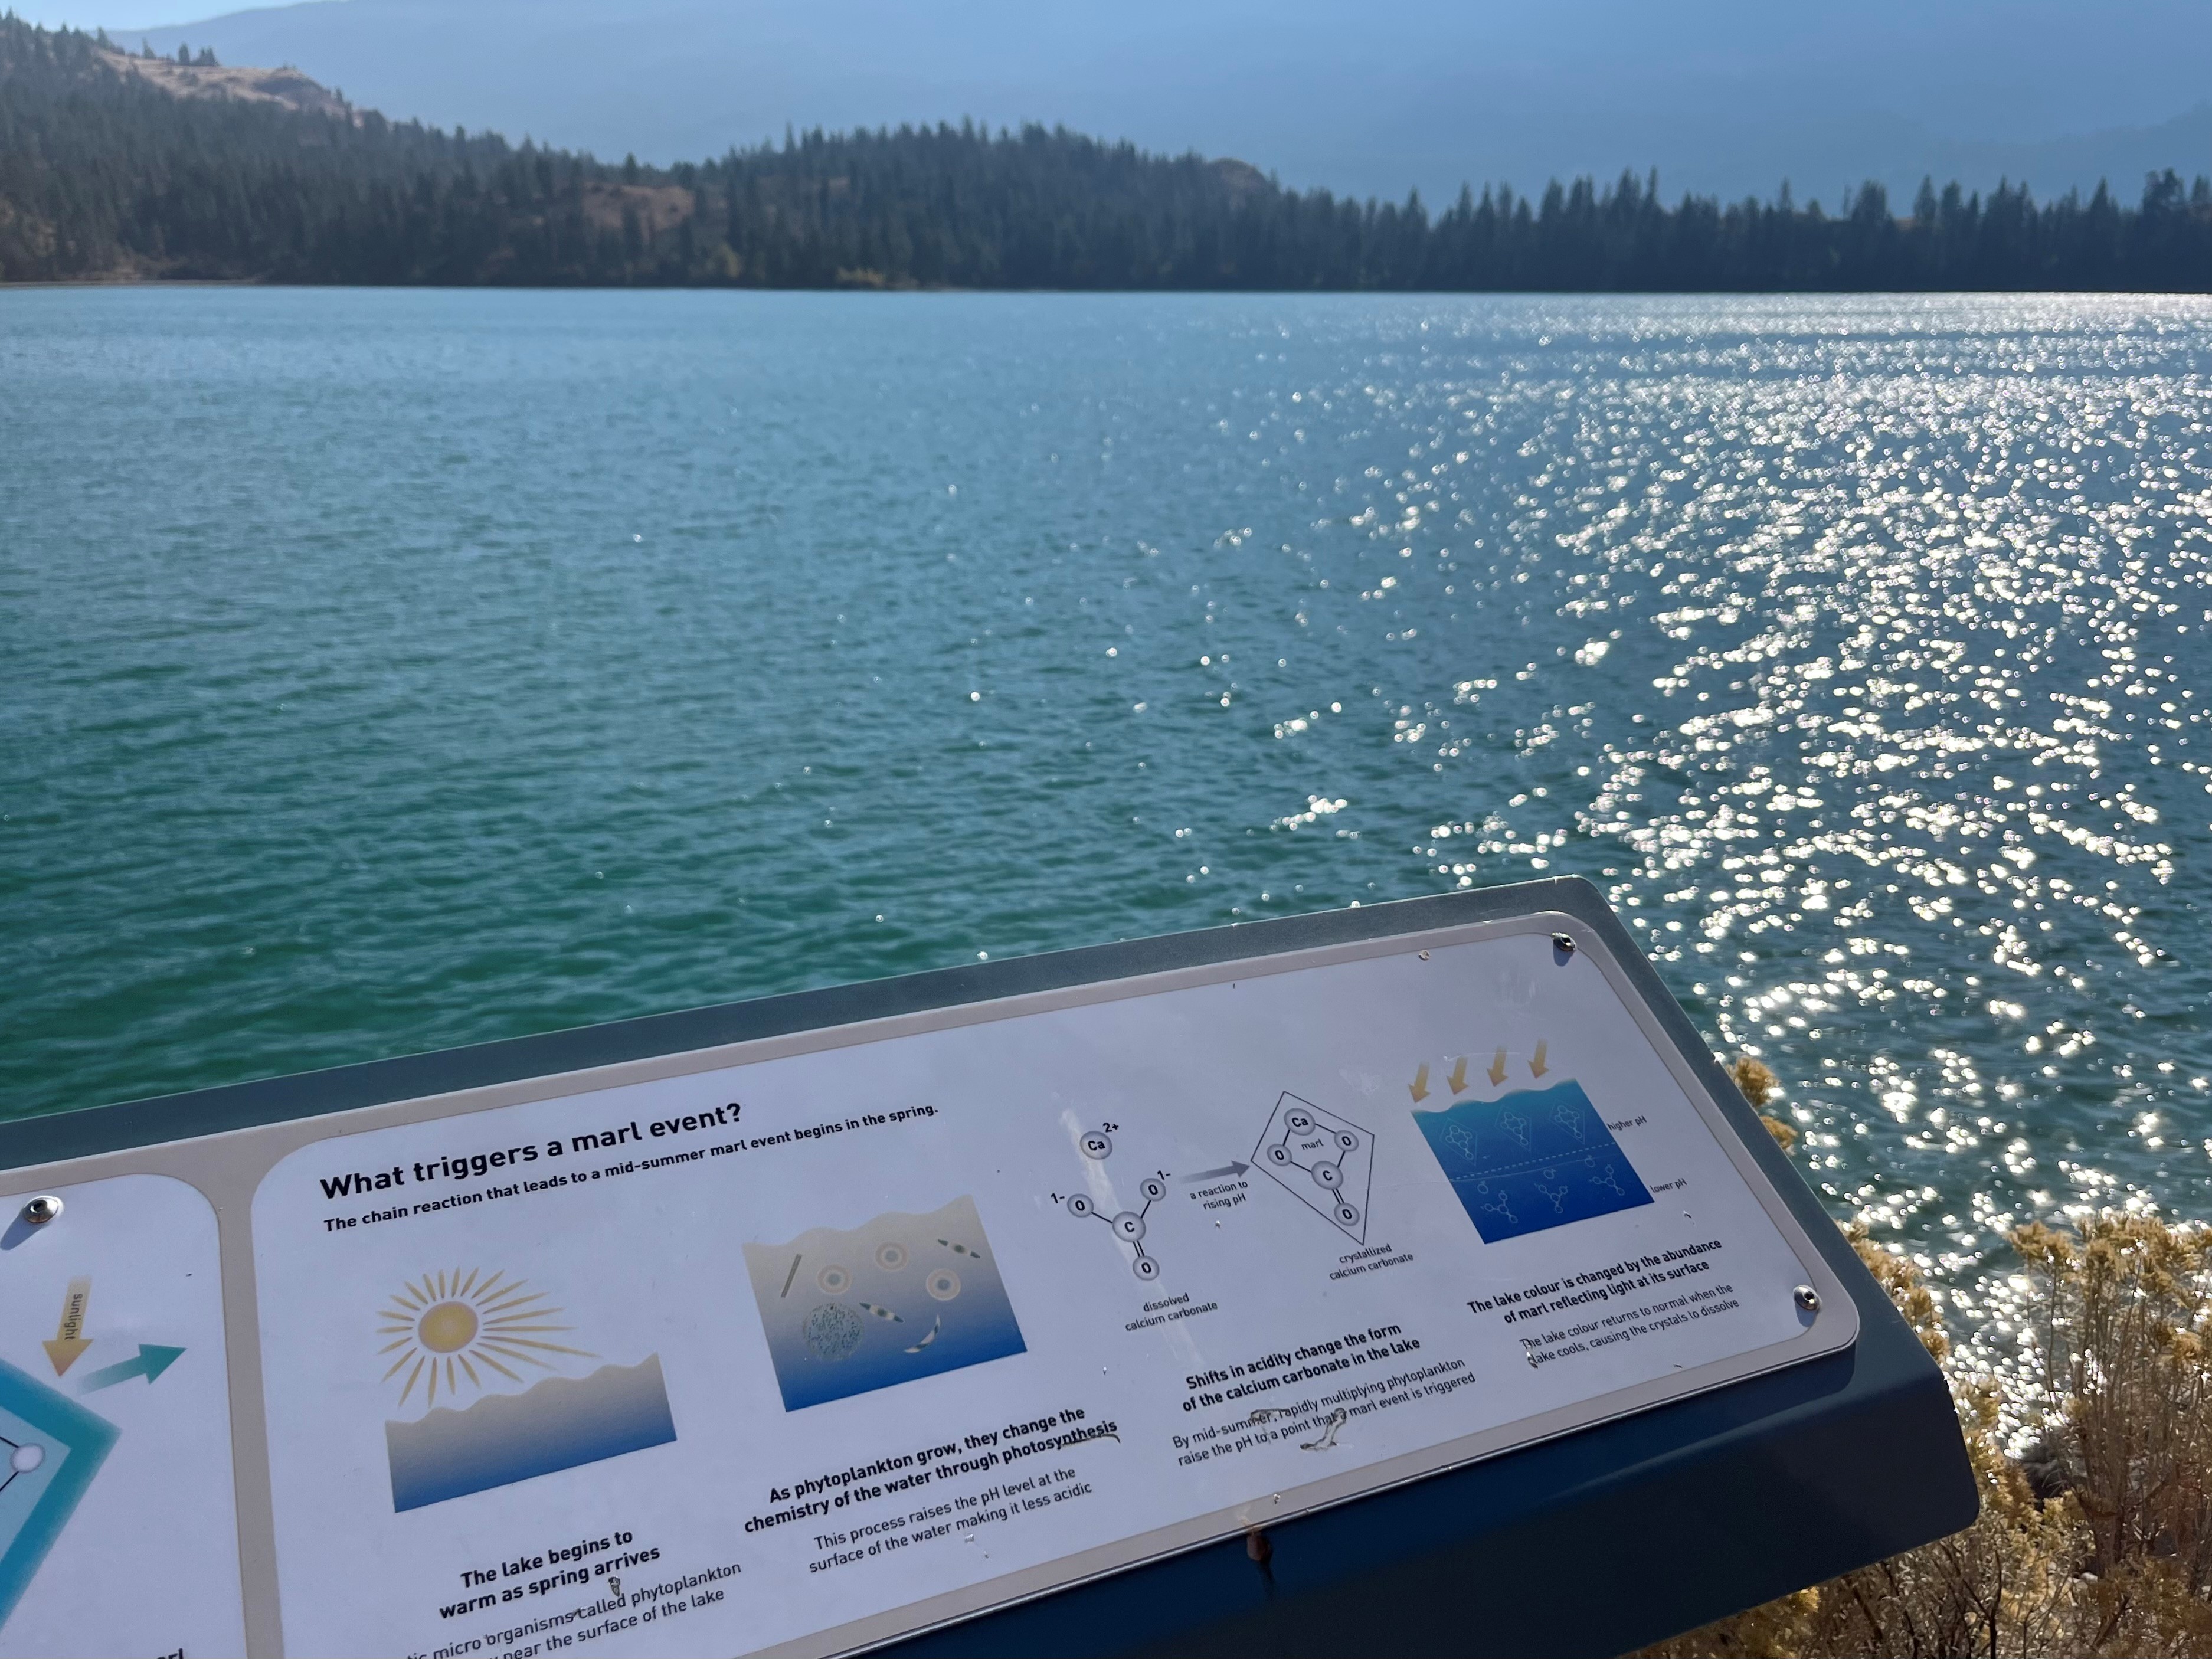 A blue green lake sparkling in the sun surrounded by evergreens and mountains with an information sign in front that says What triggers a marl event